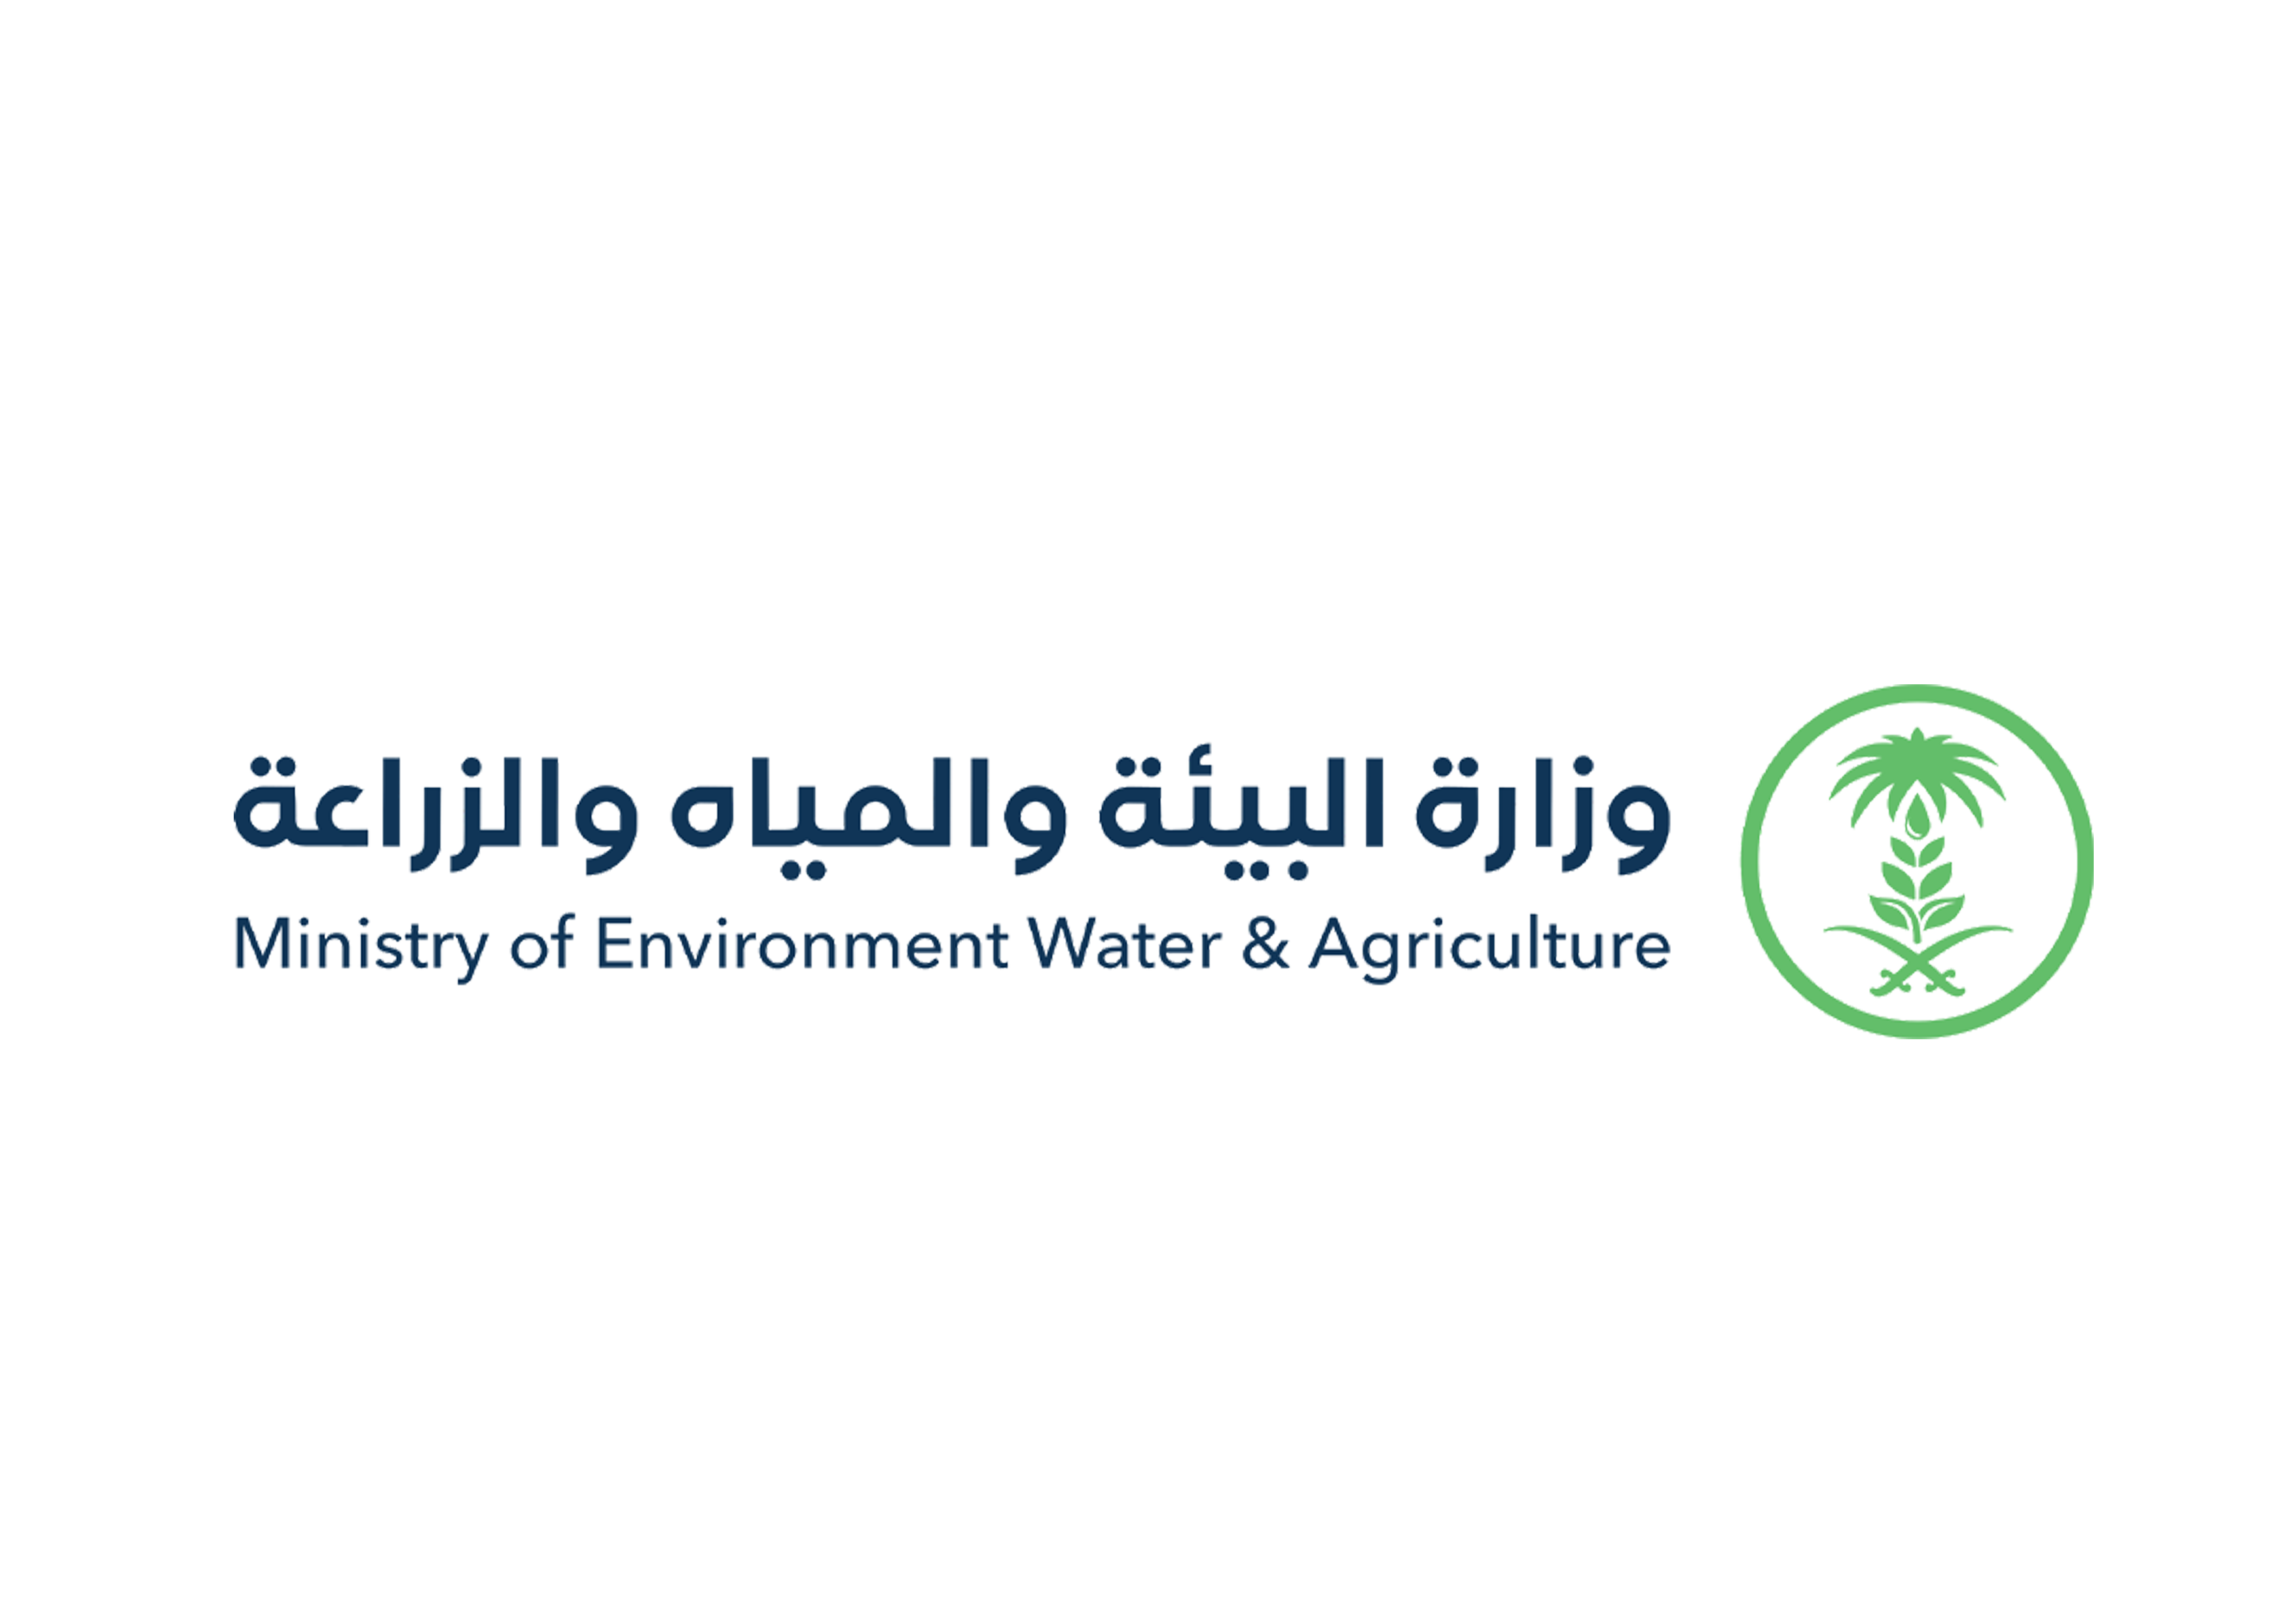 part-4Artboard-5_0000s_0000_Official_logo_of_the_Ministry_of_Environment,_Water_and_Agriculture_(Saudi_Arabia)